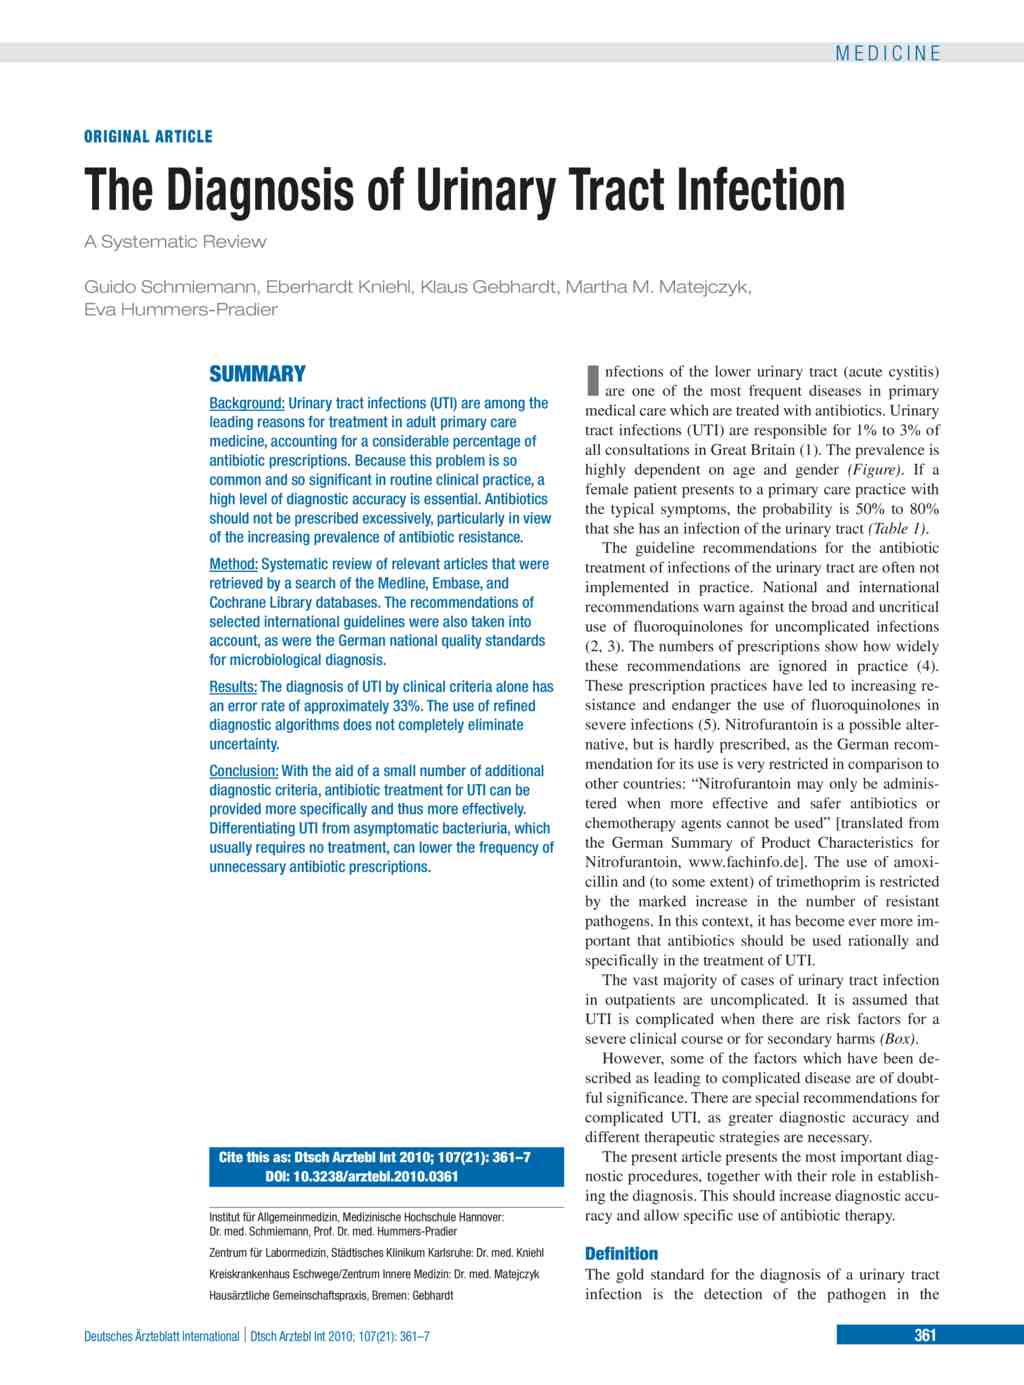 The Diagnosis Of Urinary Tract Infection (28.05.2010)